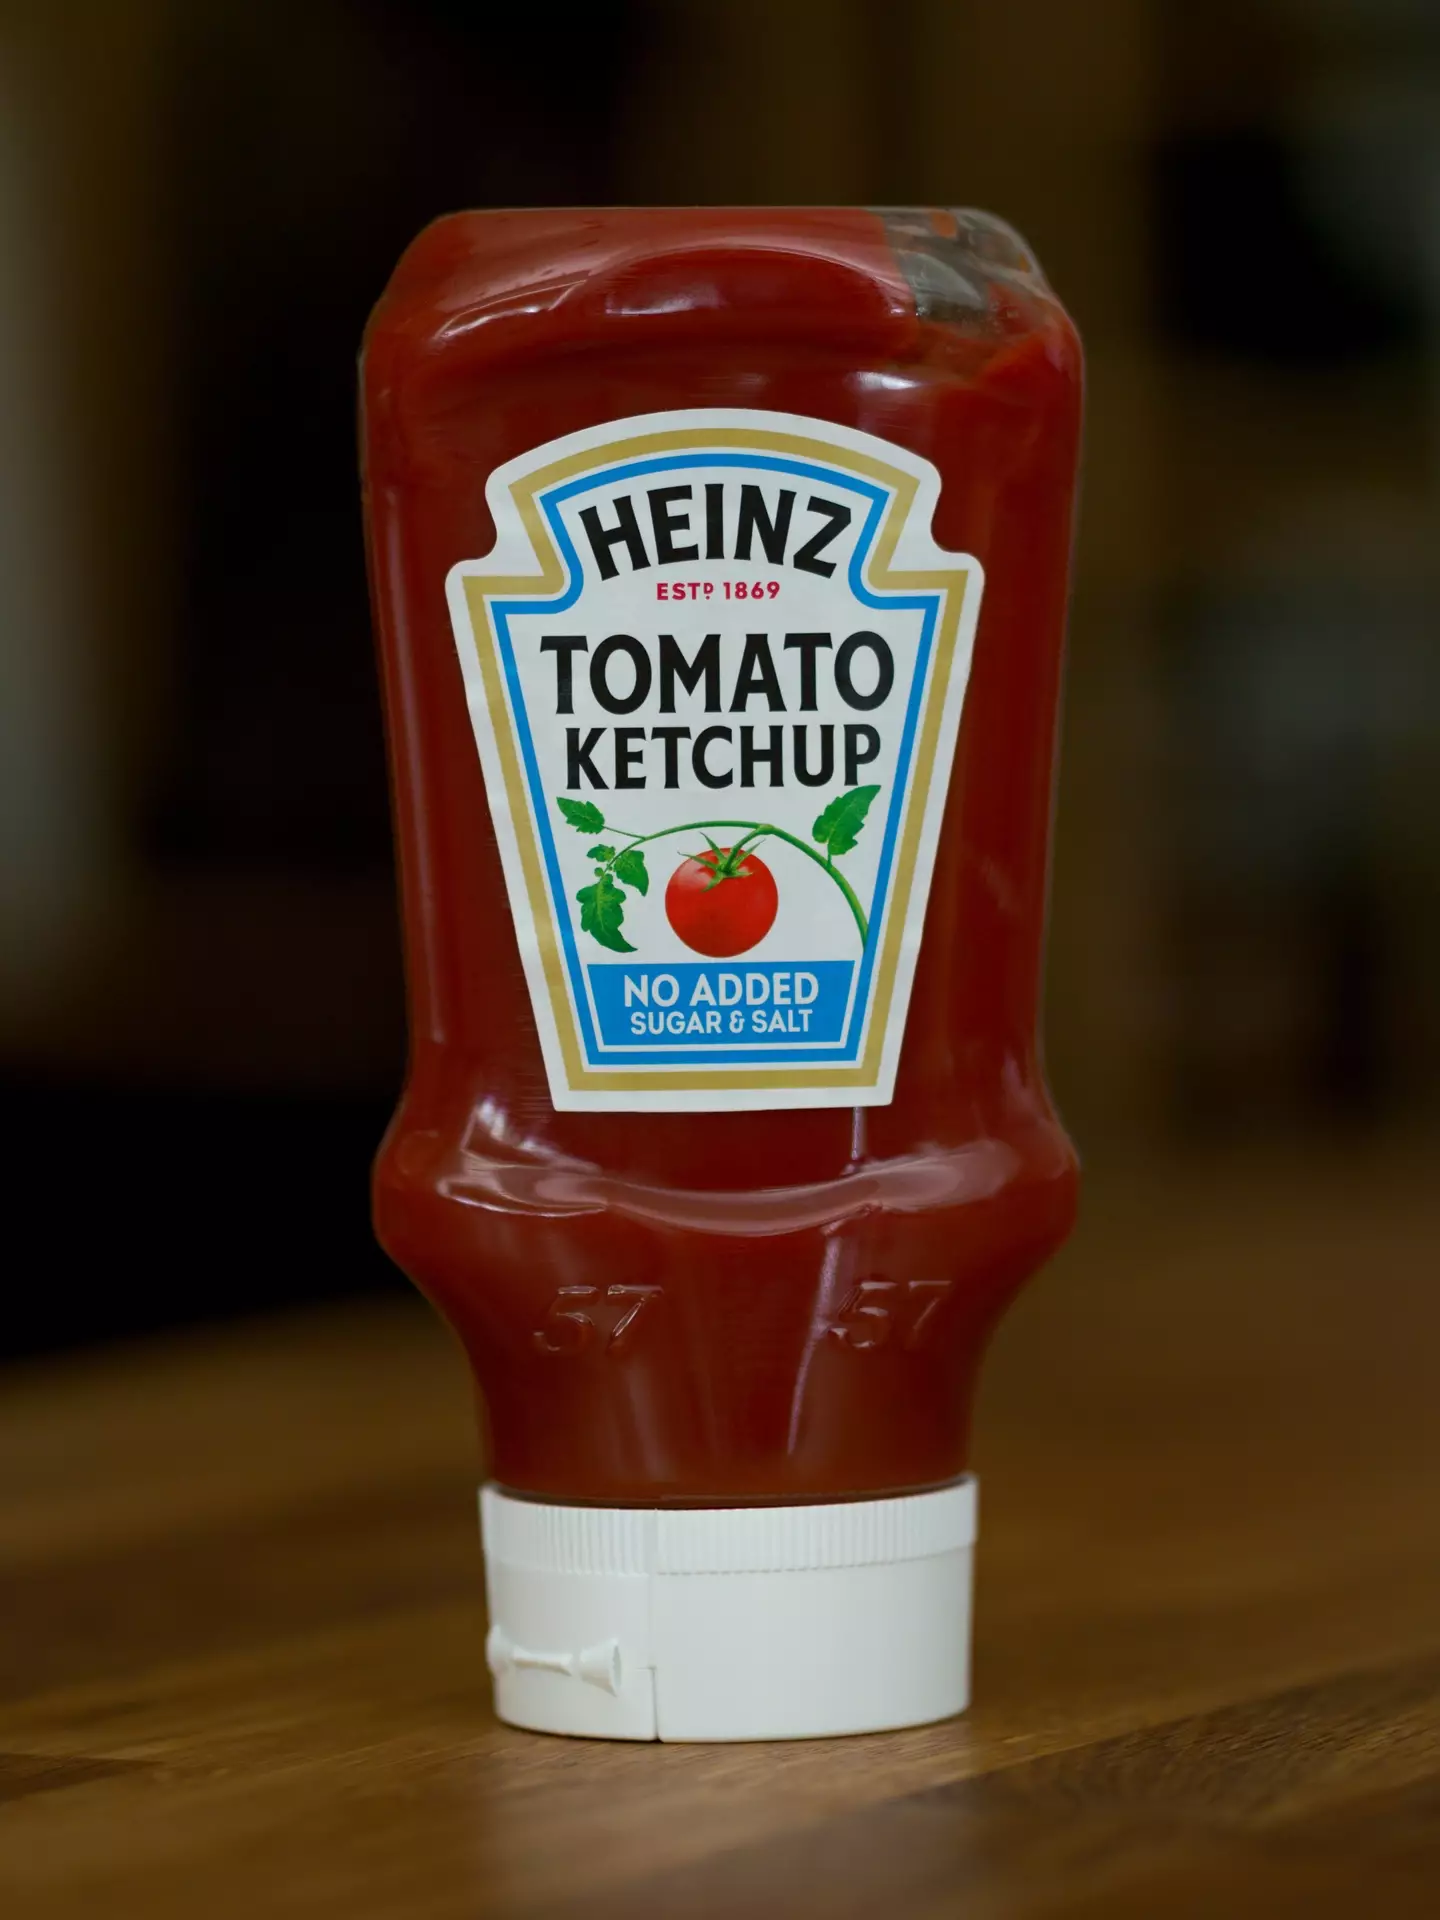 Where do you store your ketchup?